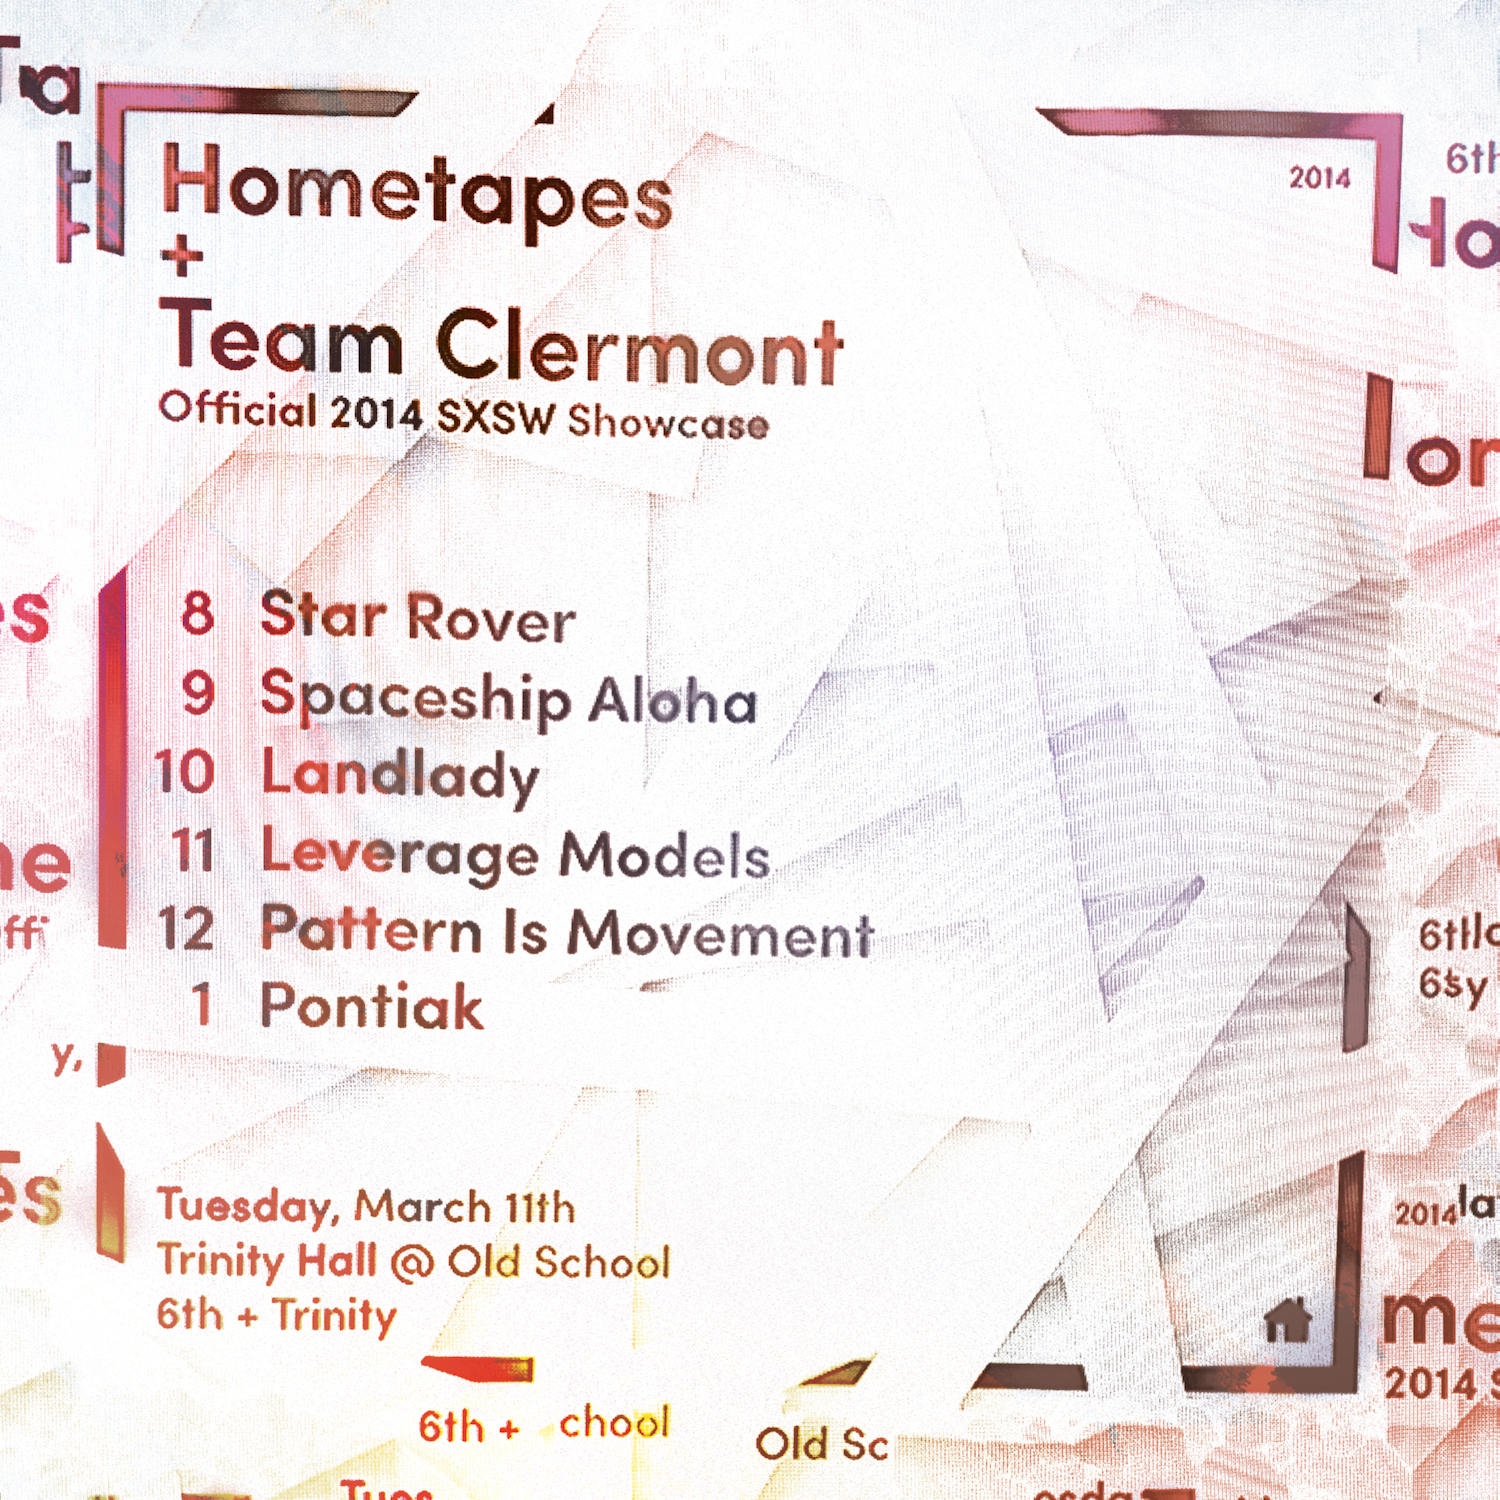 Hometapes + Team Clermont Showcase Flyer